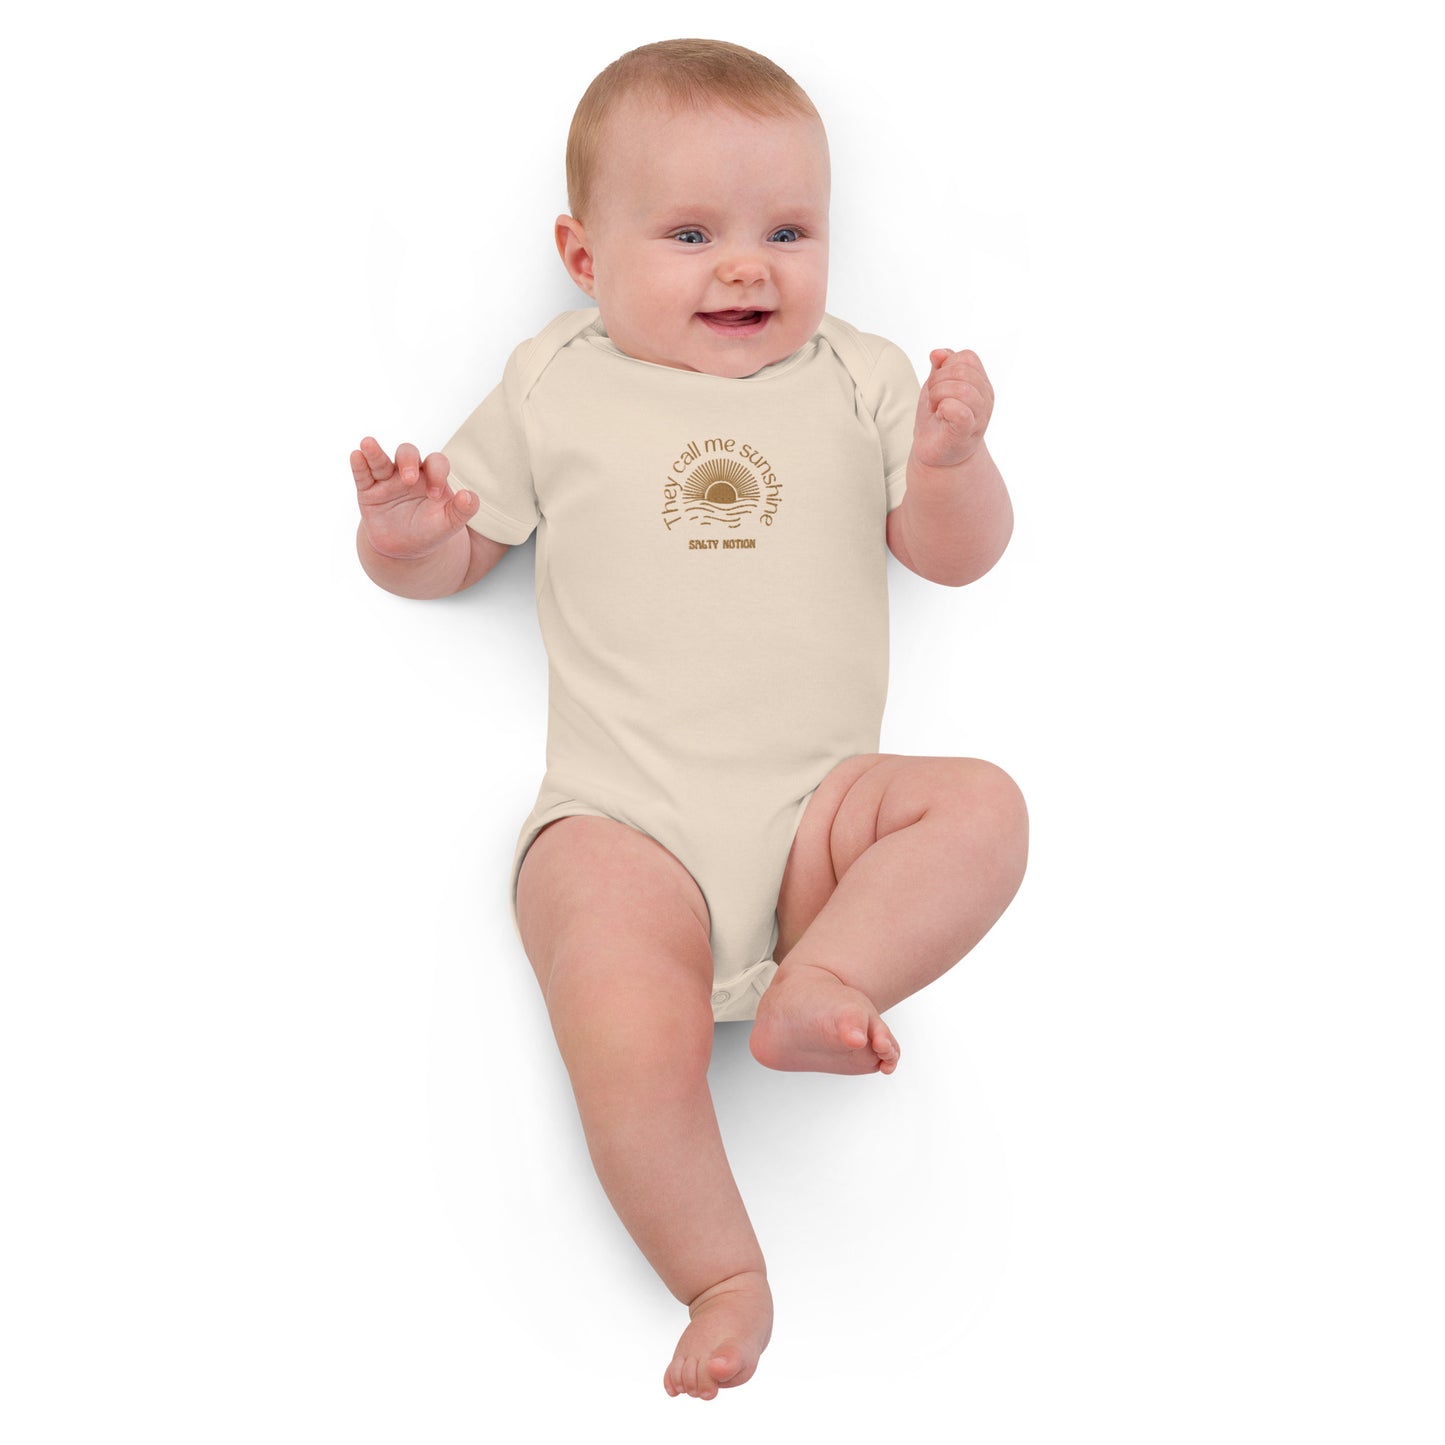 Organic They Call Me Sunshine Embroidery Baby Bodysuit Organic Natural/White